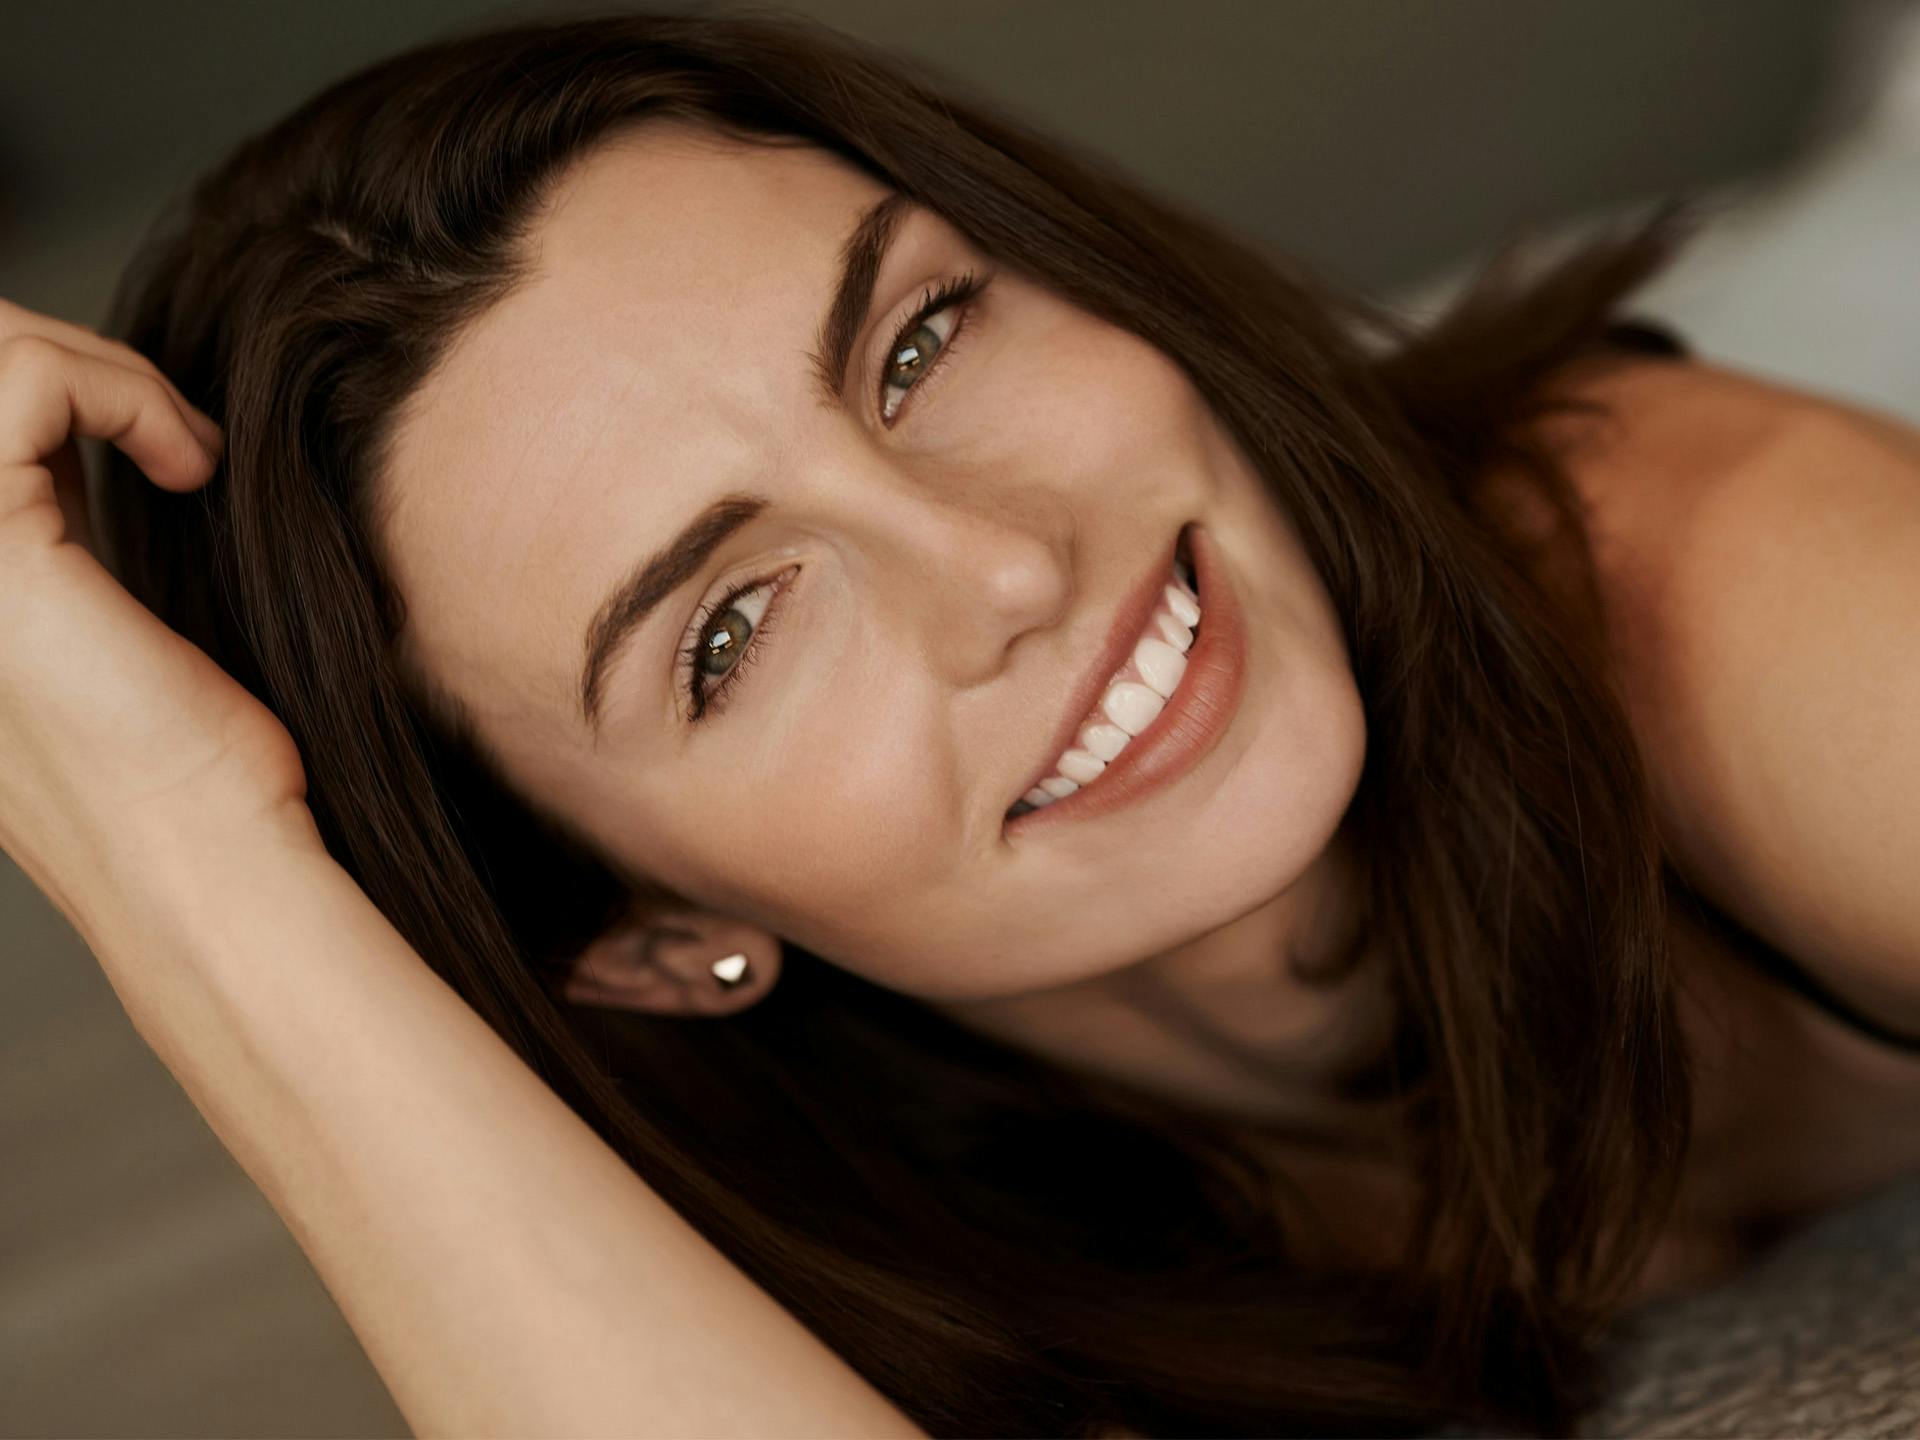 Brown haired woman laying down smiling